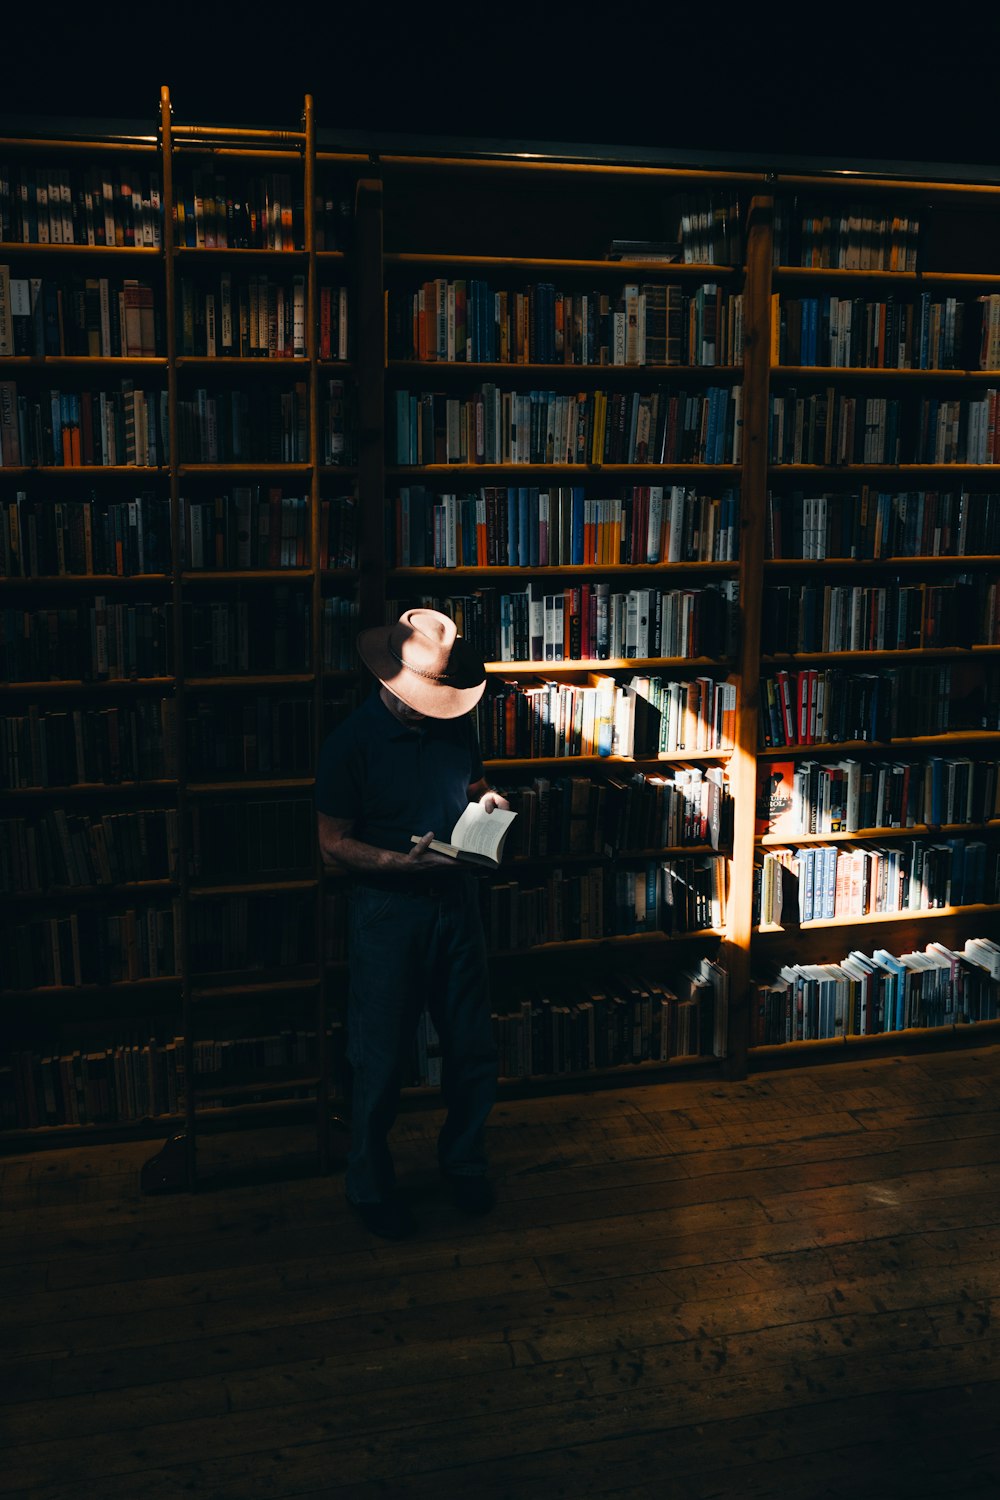 a man standing in front of a book shelf filled with books